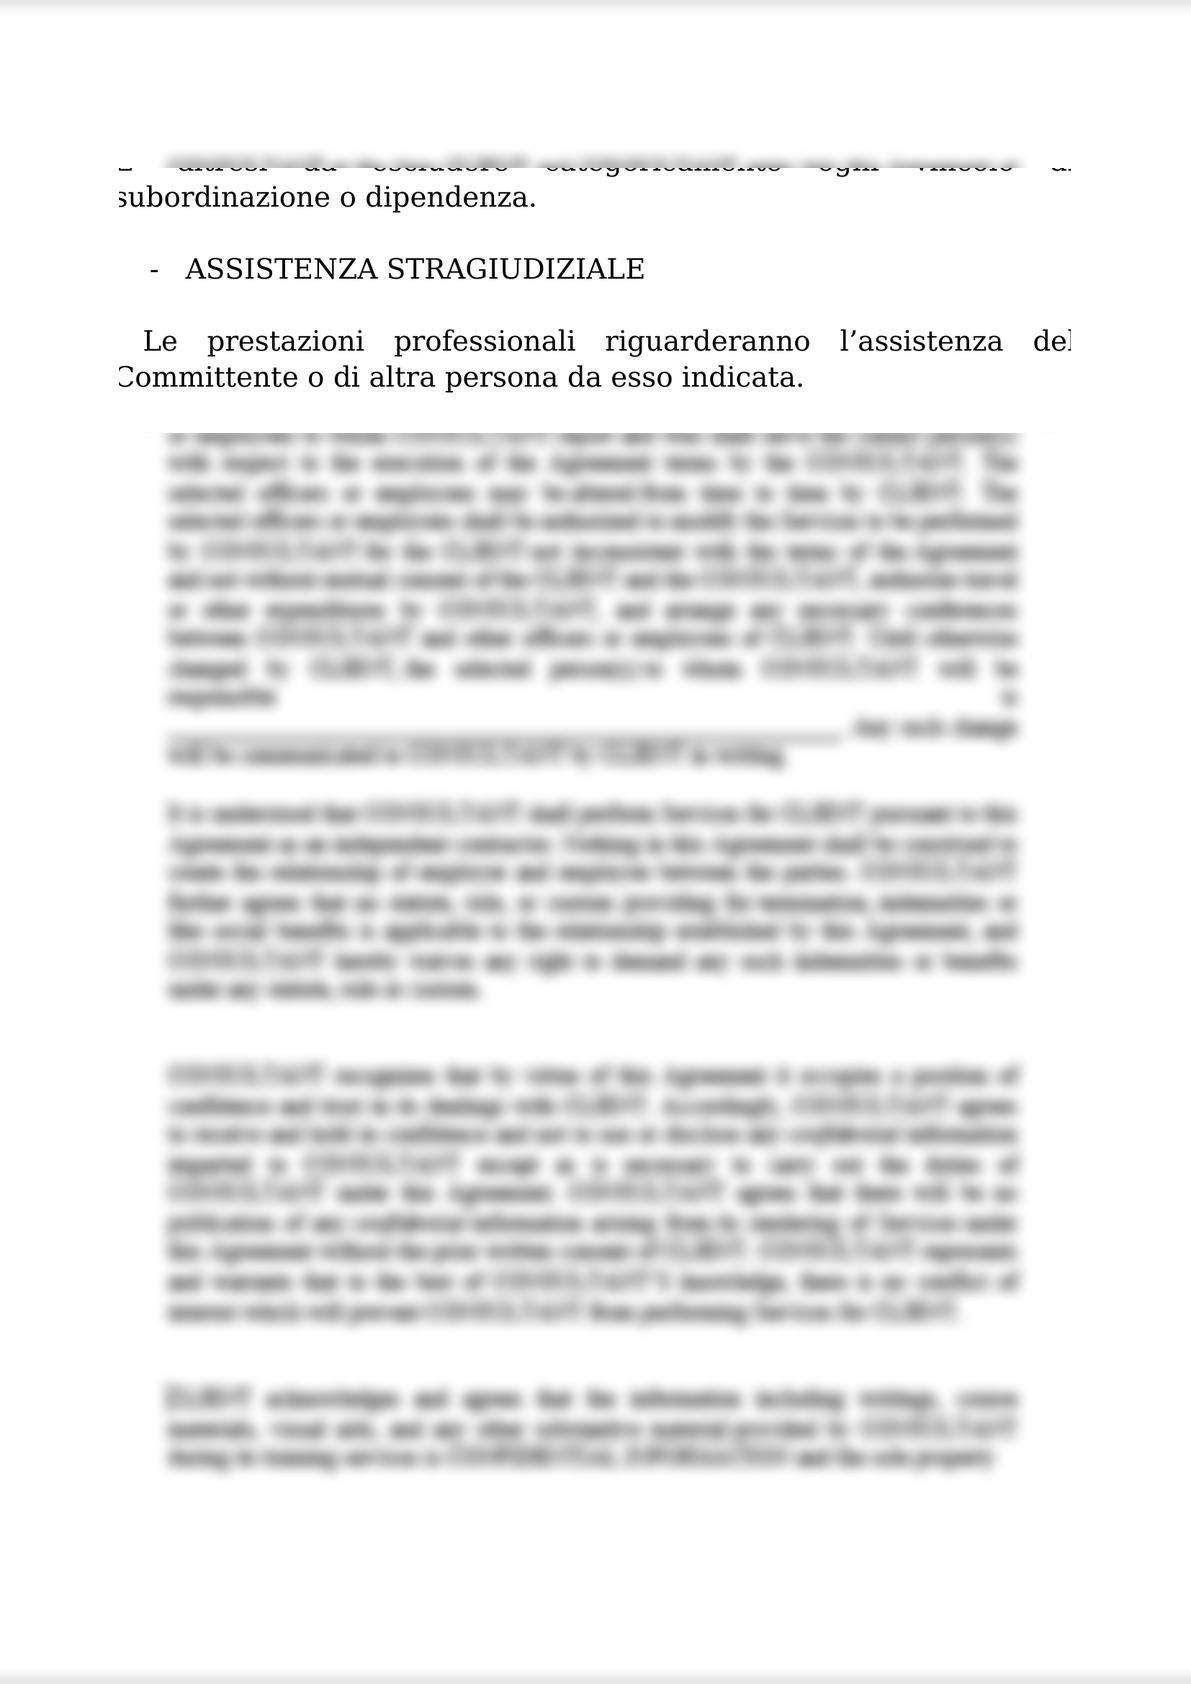 INTELLECTUAL WORK AGREEMENT FOR OUT-OF-COURT ACTIVITIES AND ATTACHMENTS 1 (PRIVACY); 2 (ANTI-MONEY LAUNDERING); AND 3 FEE QUOTE / CONTRATTO D’OPERA INTELLETTUALE STRAGIUDIZIALE-2